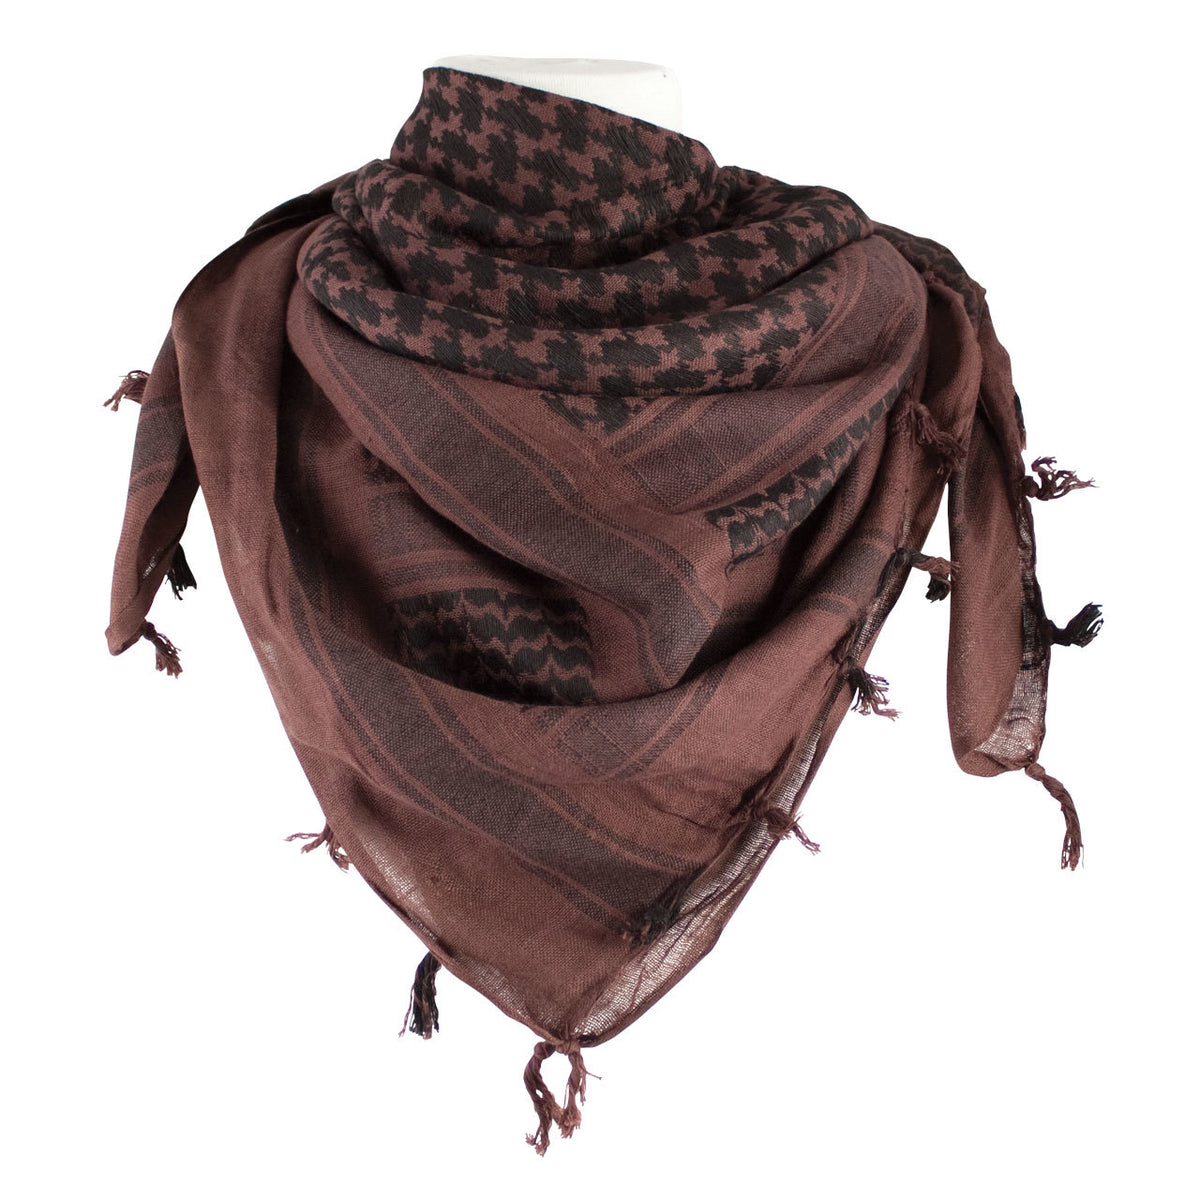 Red Rock Outdoor Gear Shemagh Head Wraps